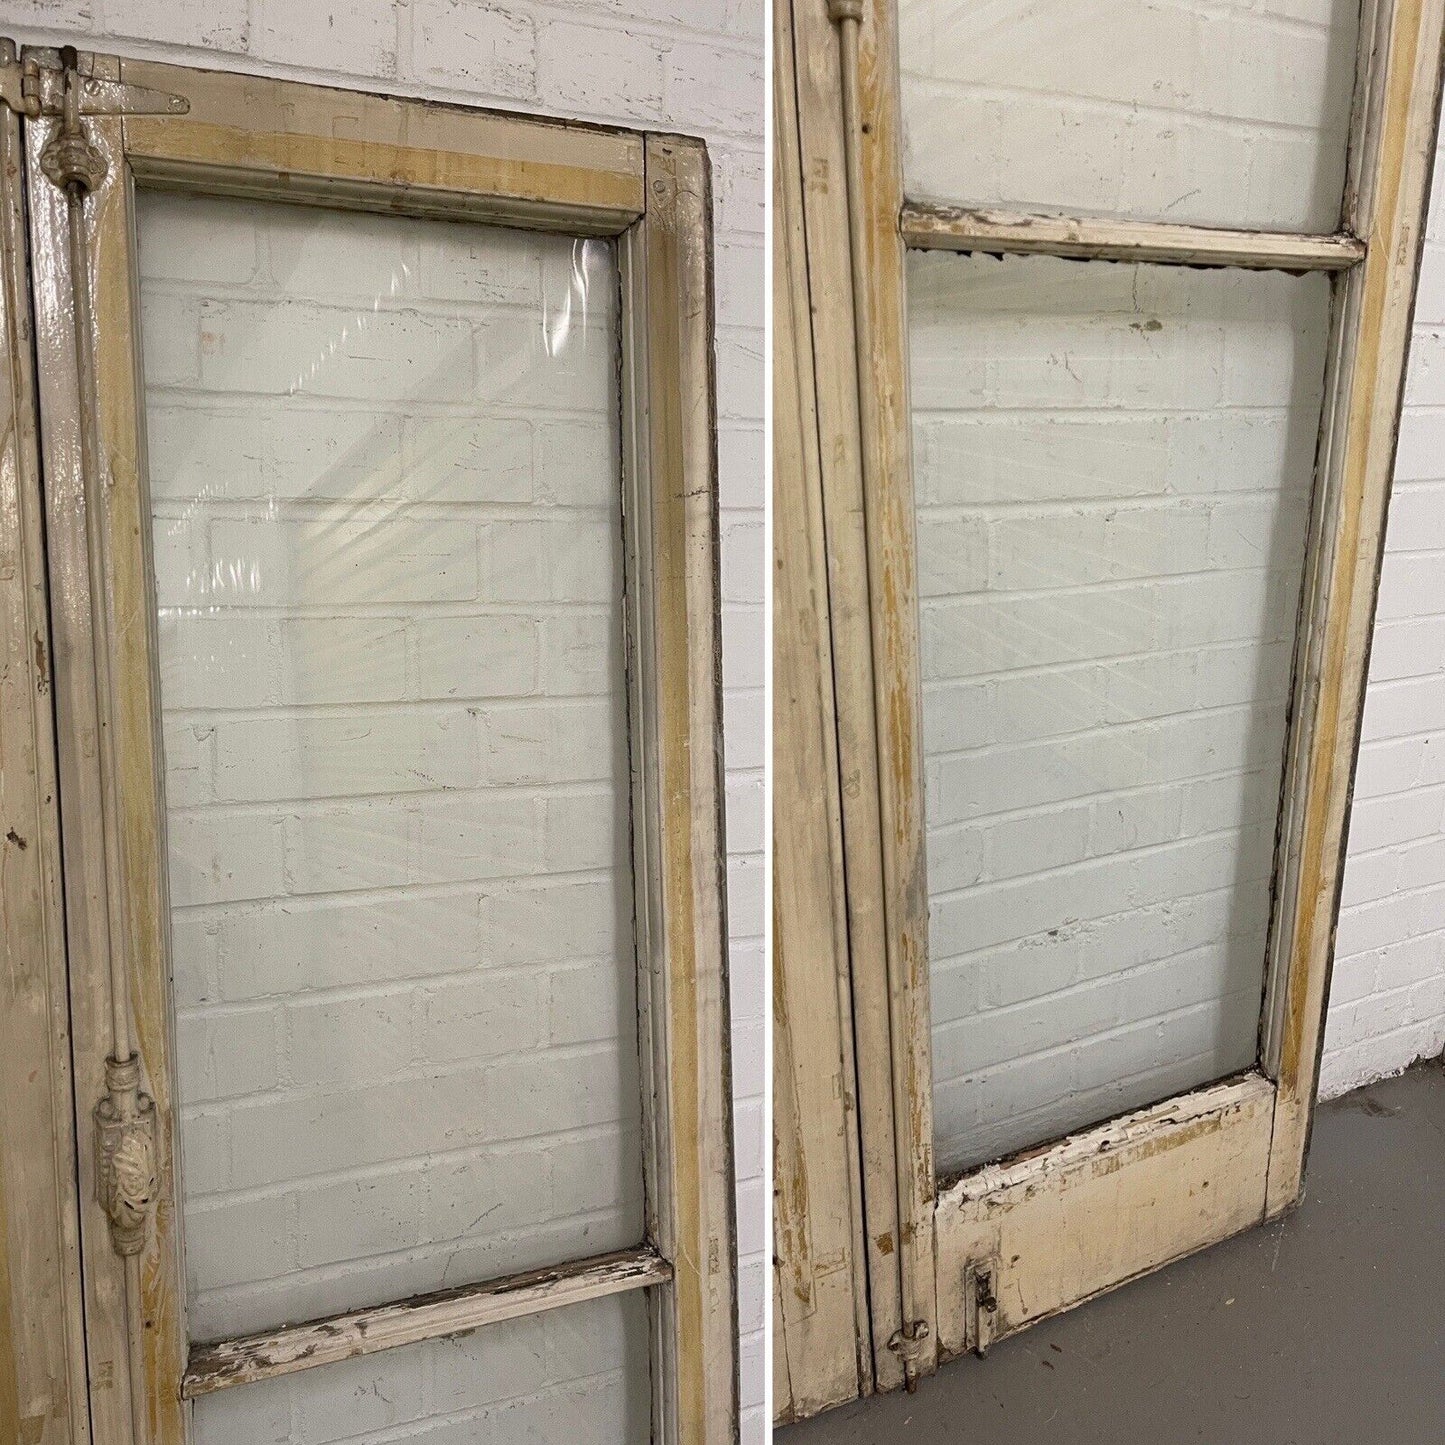 Reclaimed Old French Single Panel Glass Wooden Double Doors  1975 x 1068mm